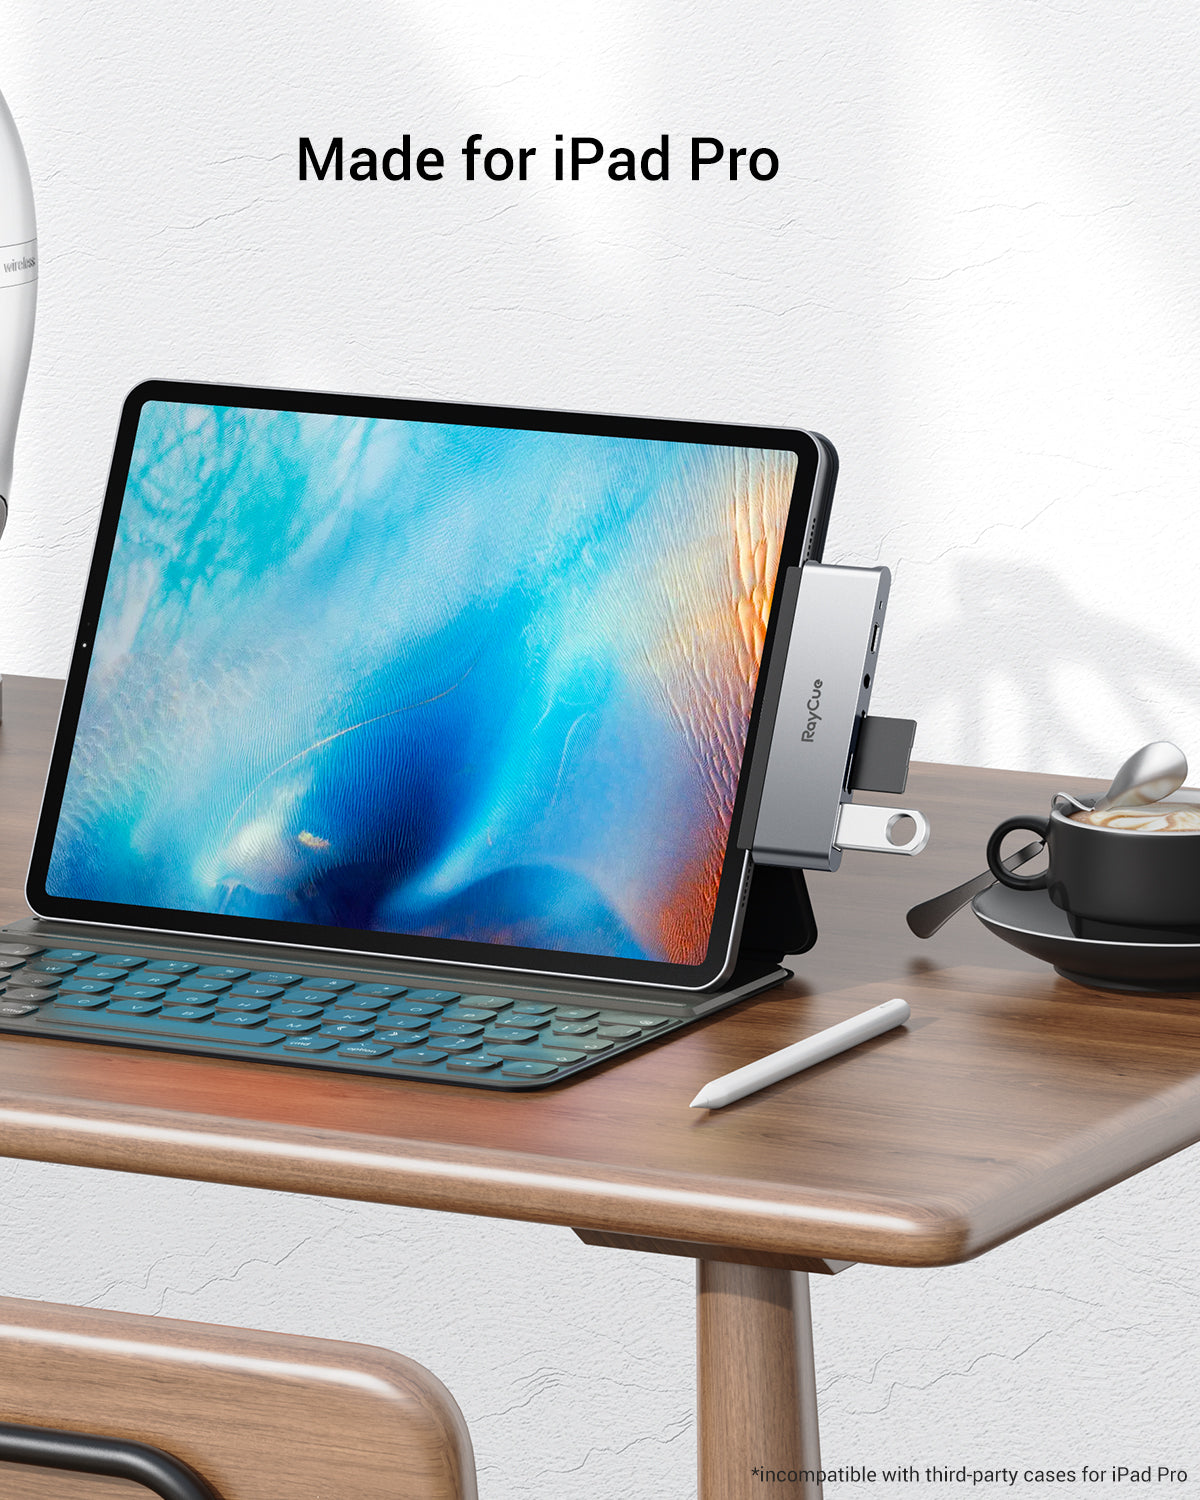 RayCue ExpandPro Sole 6-in-1 USB-C Hub for iPad Pro 2018/2020/2021